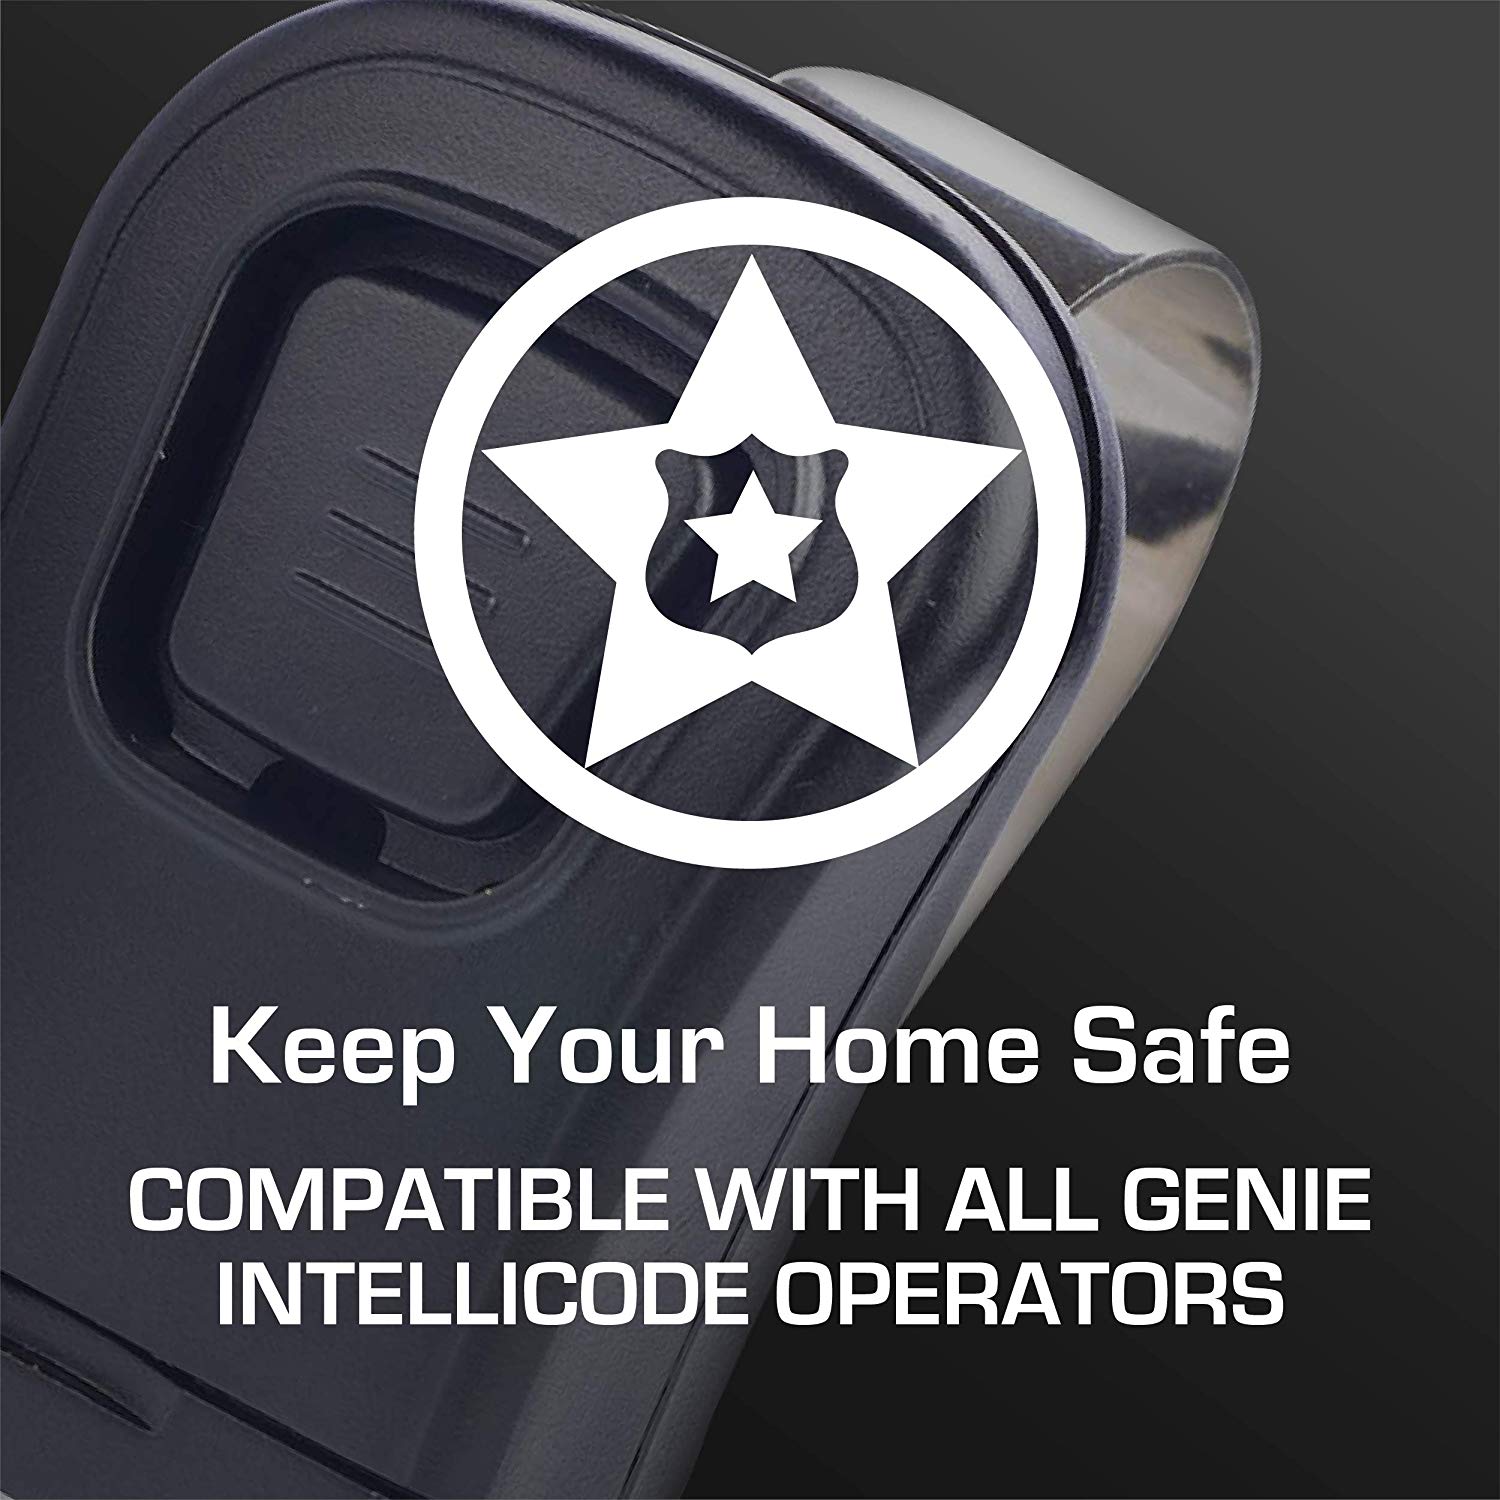 Genies one button G1T-BX remote will keep your home safe with Intellicode technology